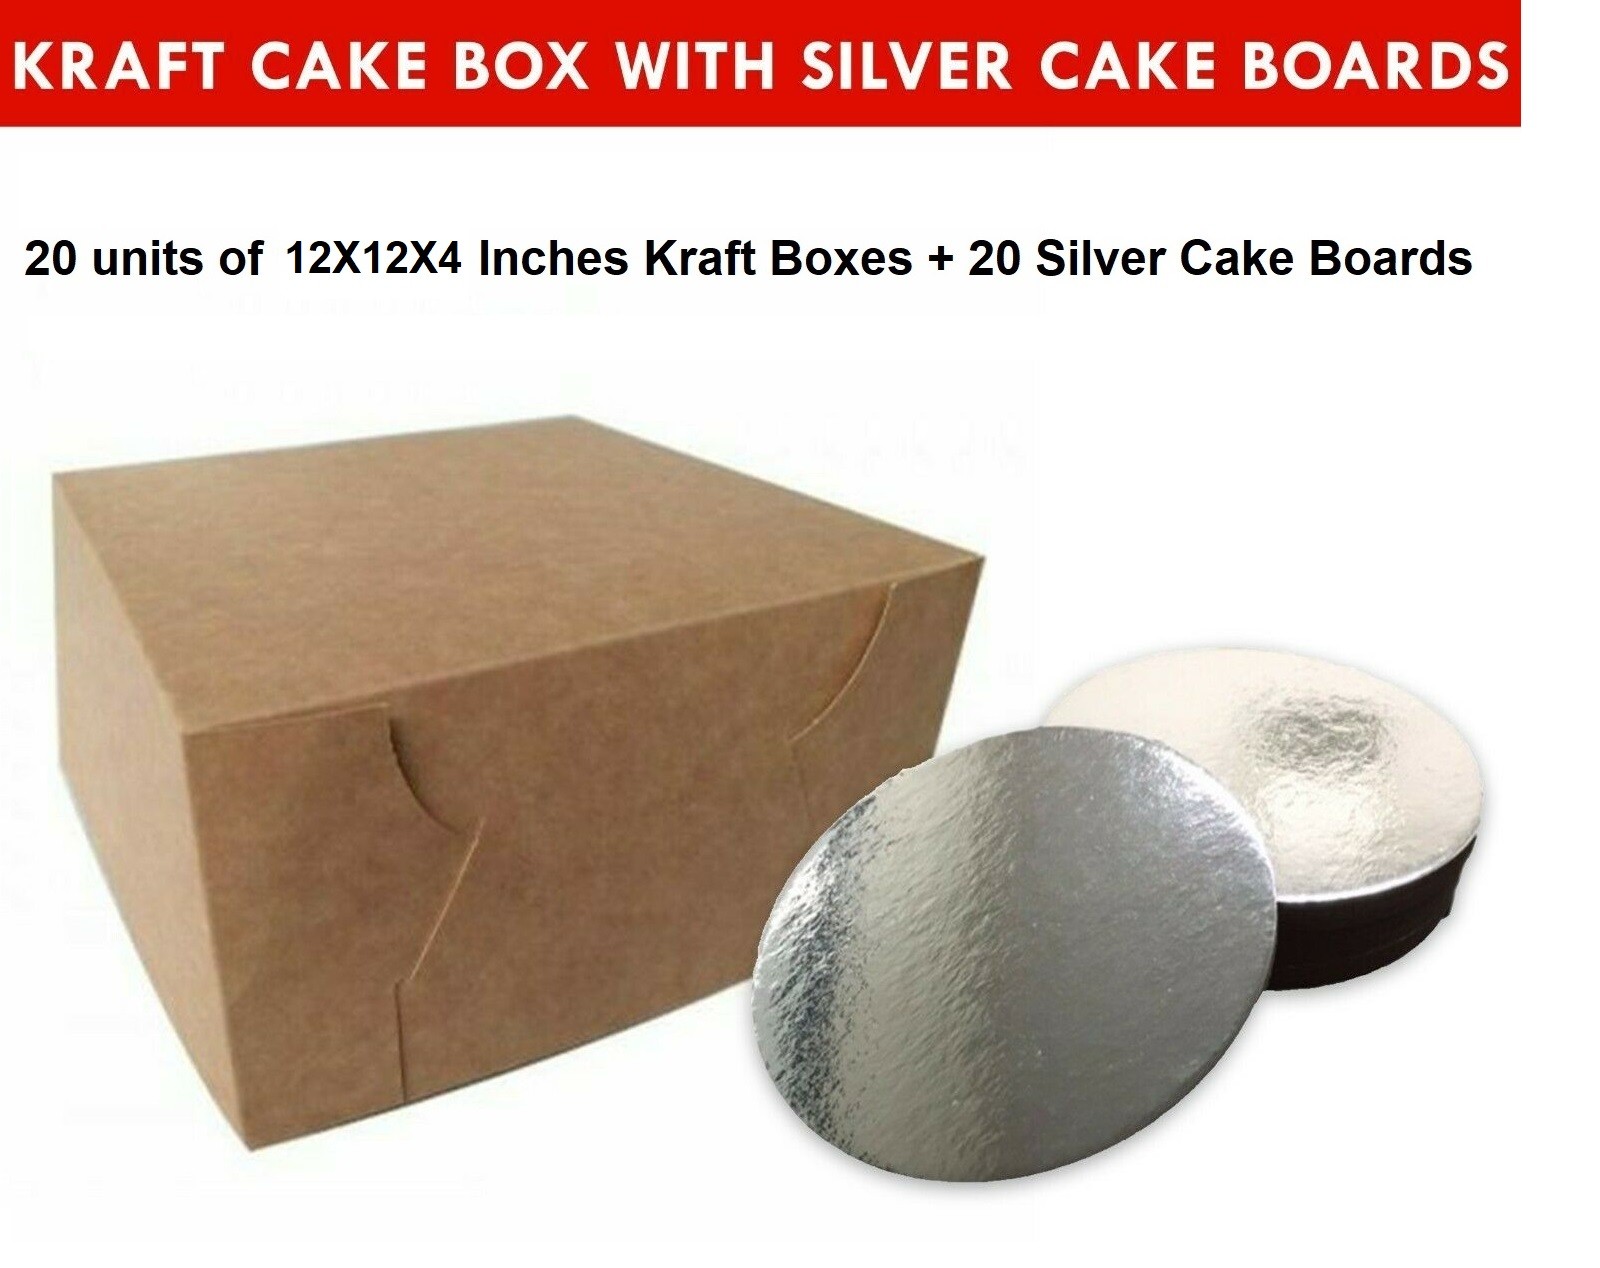 Kraft Cake Boxes with Round boards - 12" x 12" x 4" ($4.2/pc x 20 units)